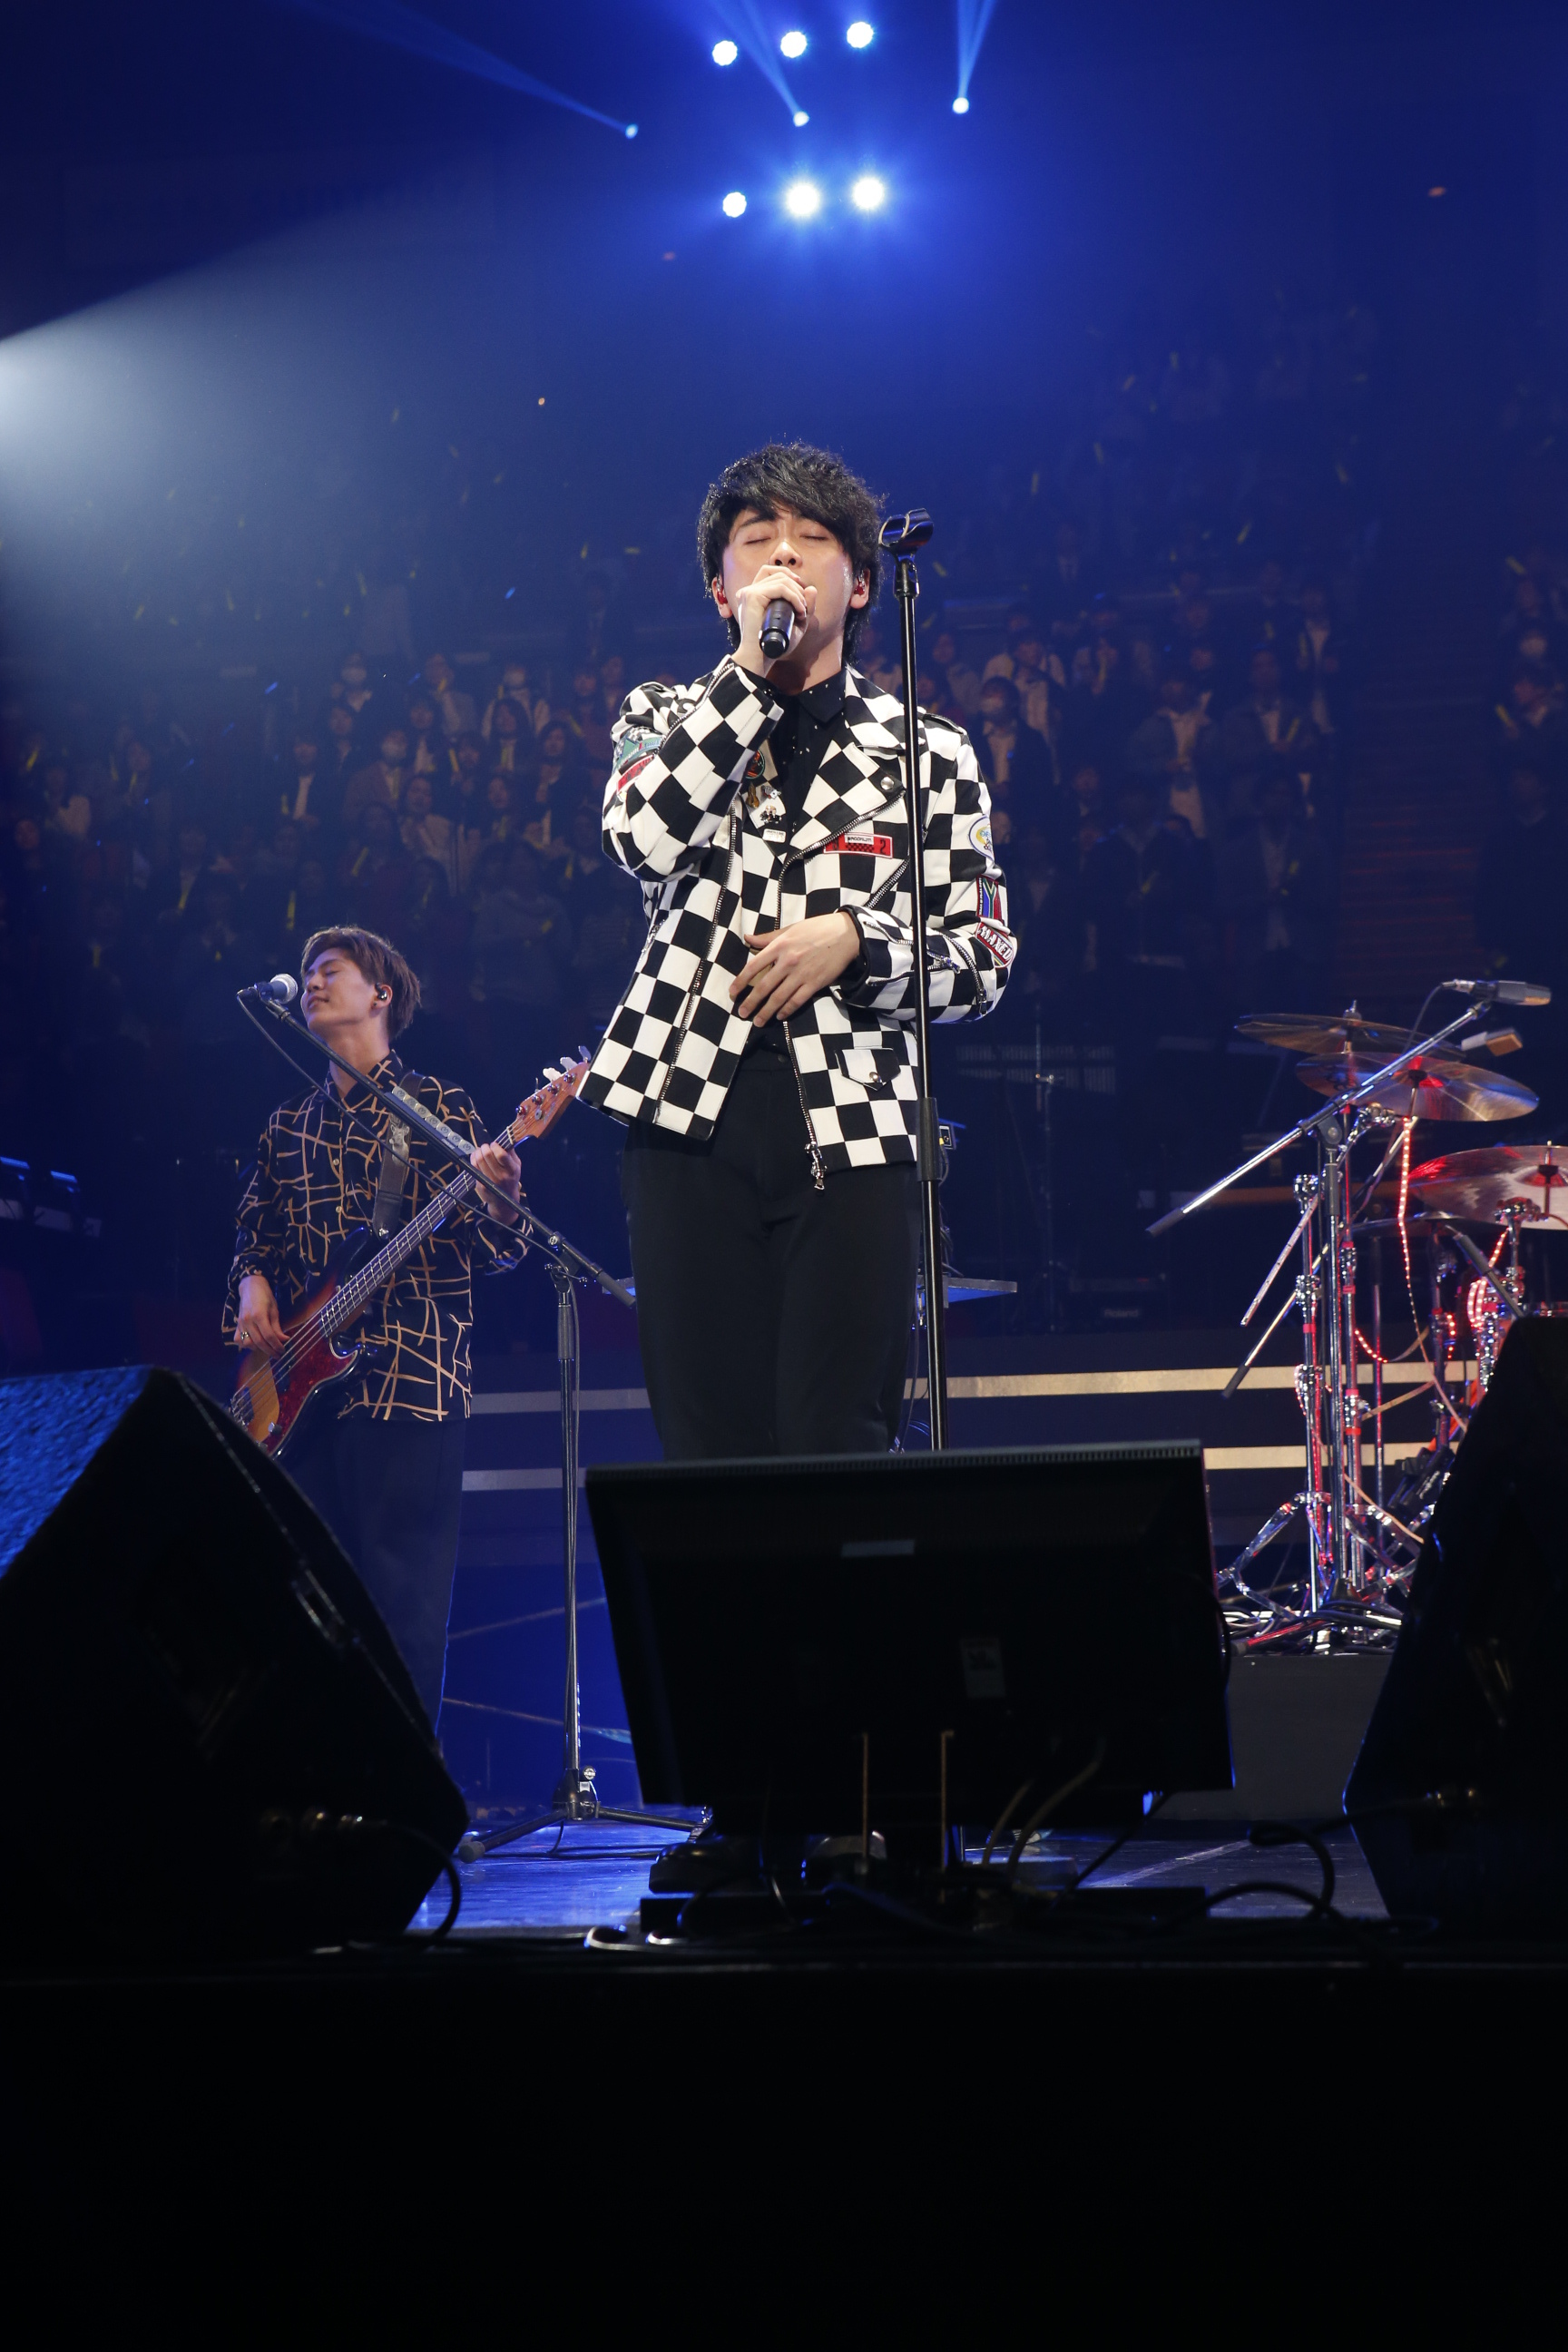 Mrs. GREEN APPLE LIVE SDD 2018 OFFICIAL PHOTO